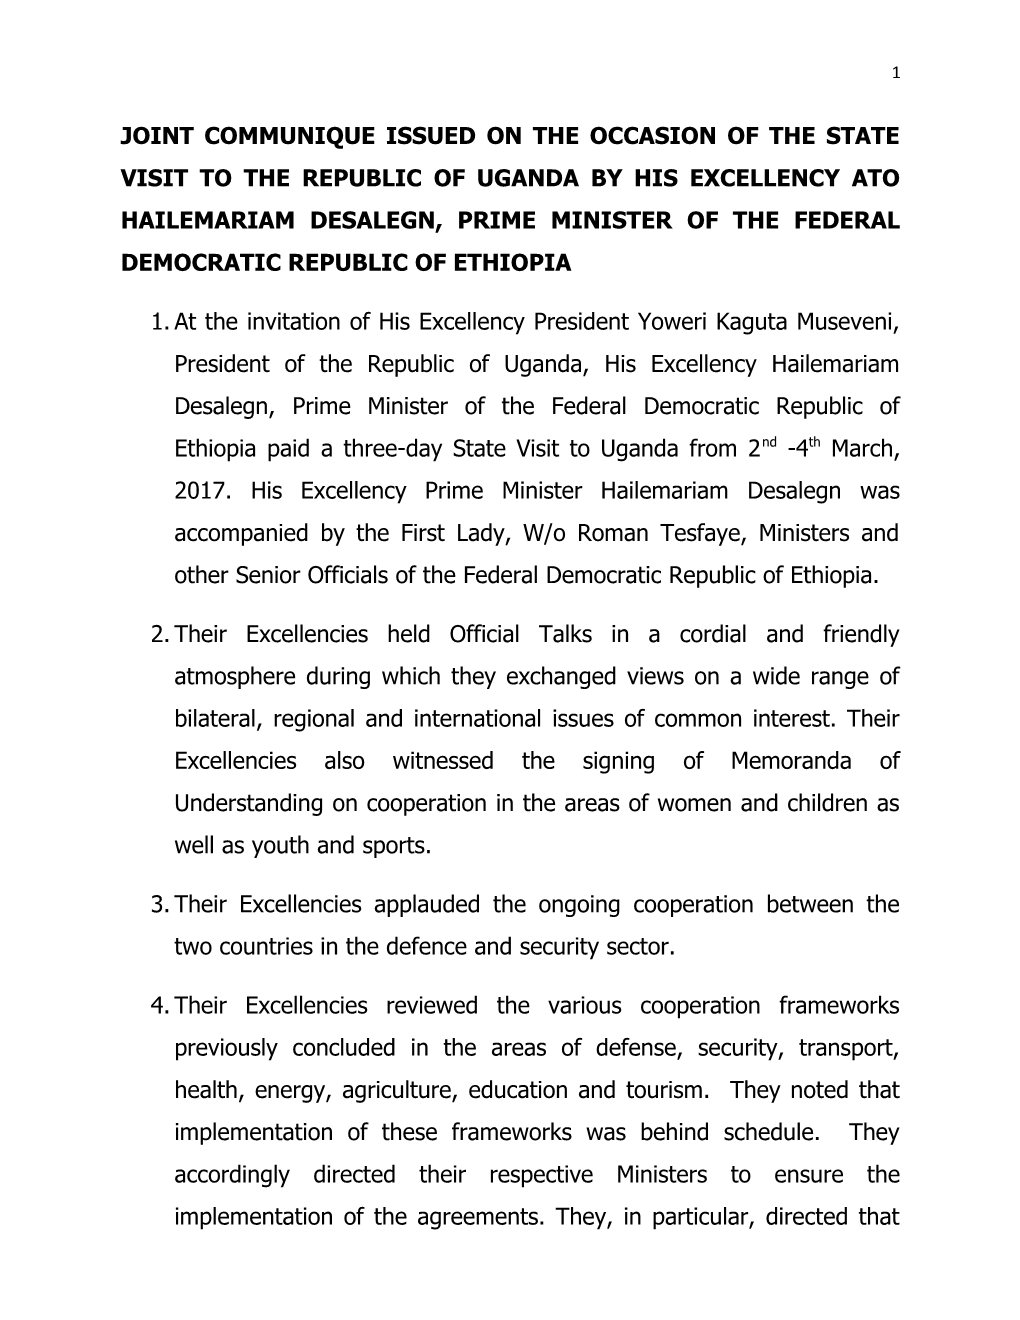 Joint Communique Issued on the Occasion of the State Visit to the Republic of Uganda By